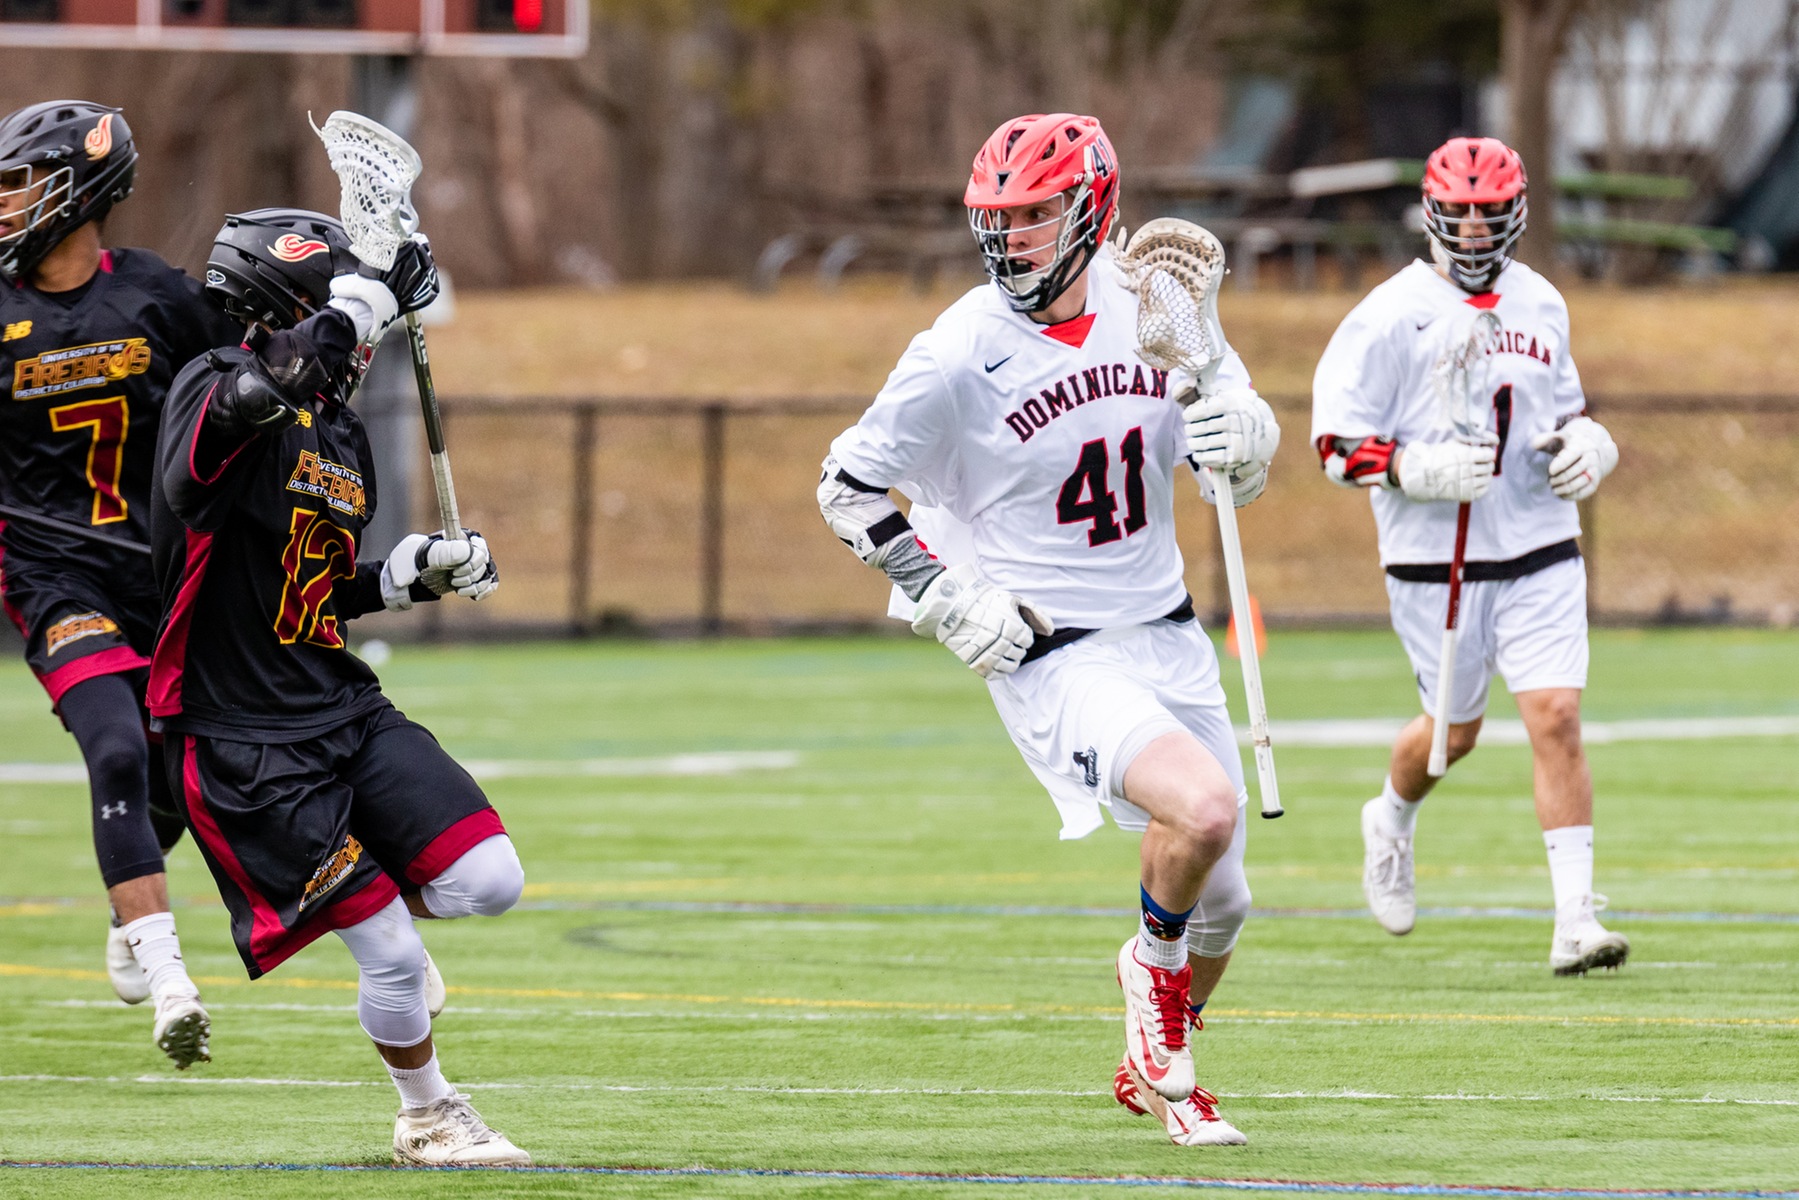 MEN'S LACROSSE EDGED BY STAC